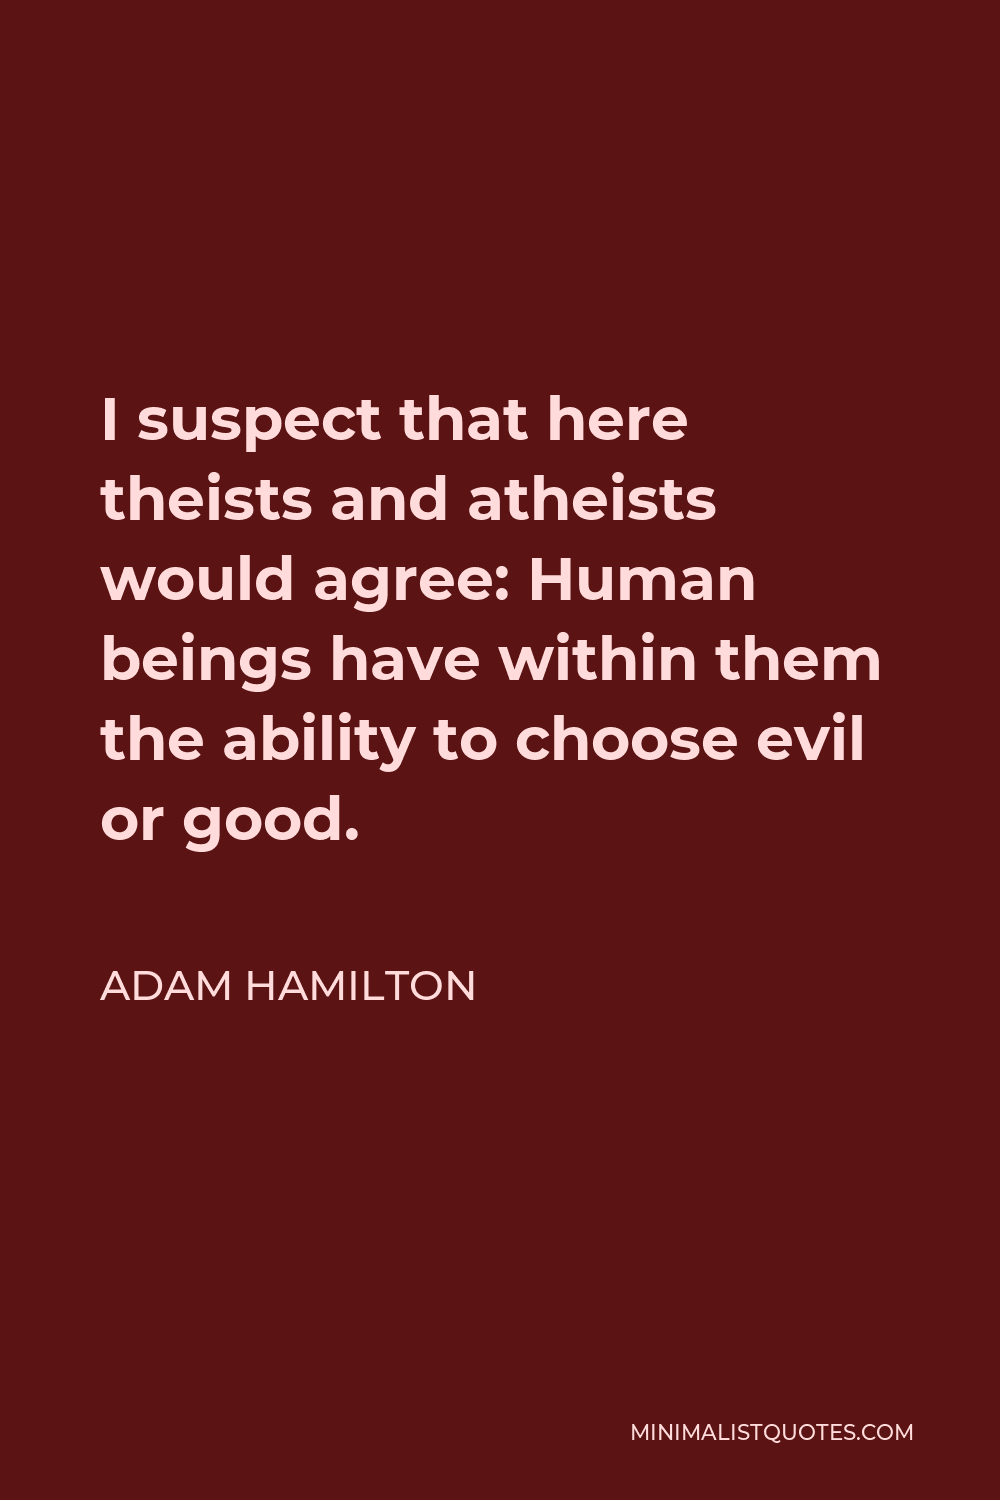 Adam Hamilton Quote - I suspect that here theists and atheists would agree: Human beings have within them the ability to choose evil or good.